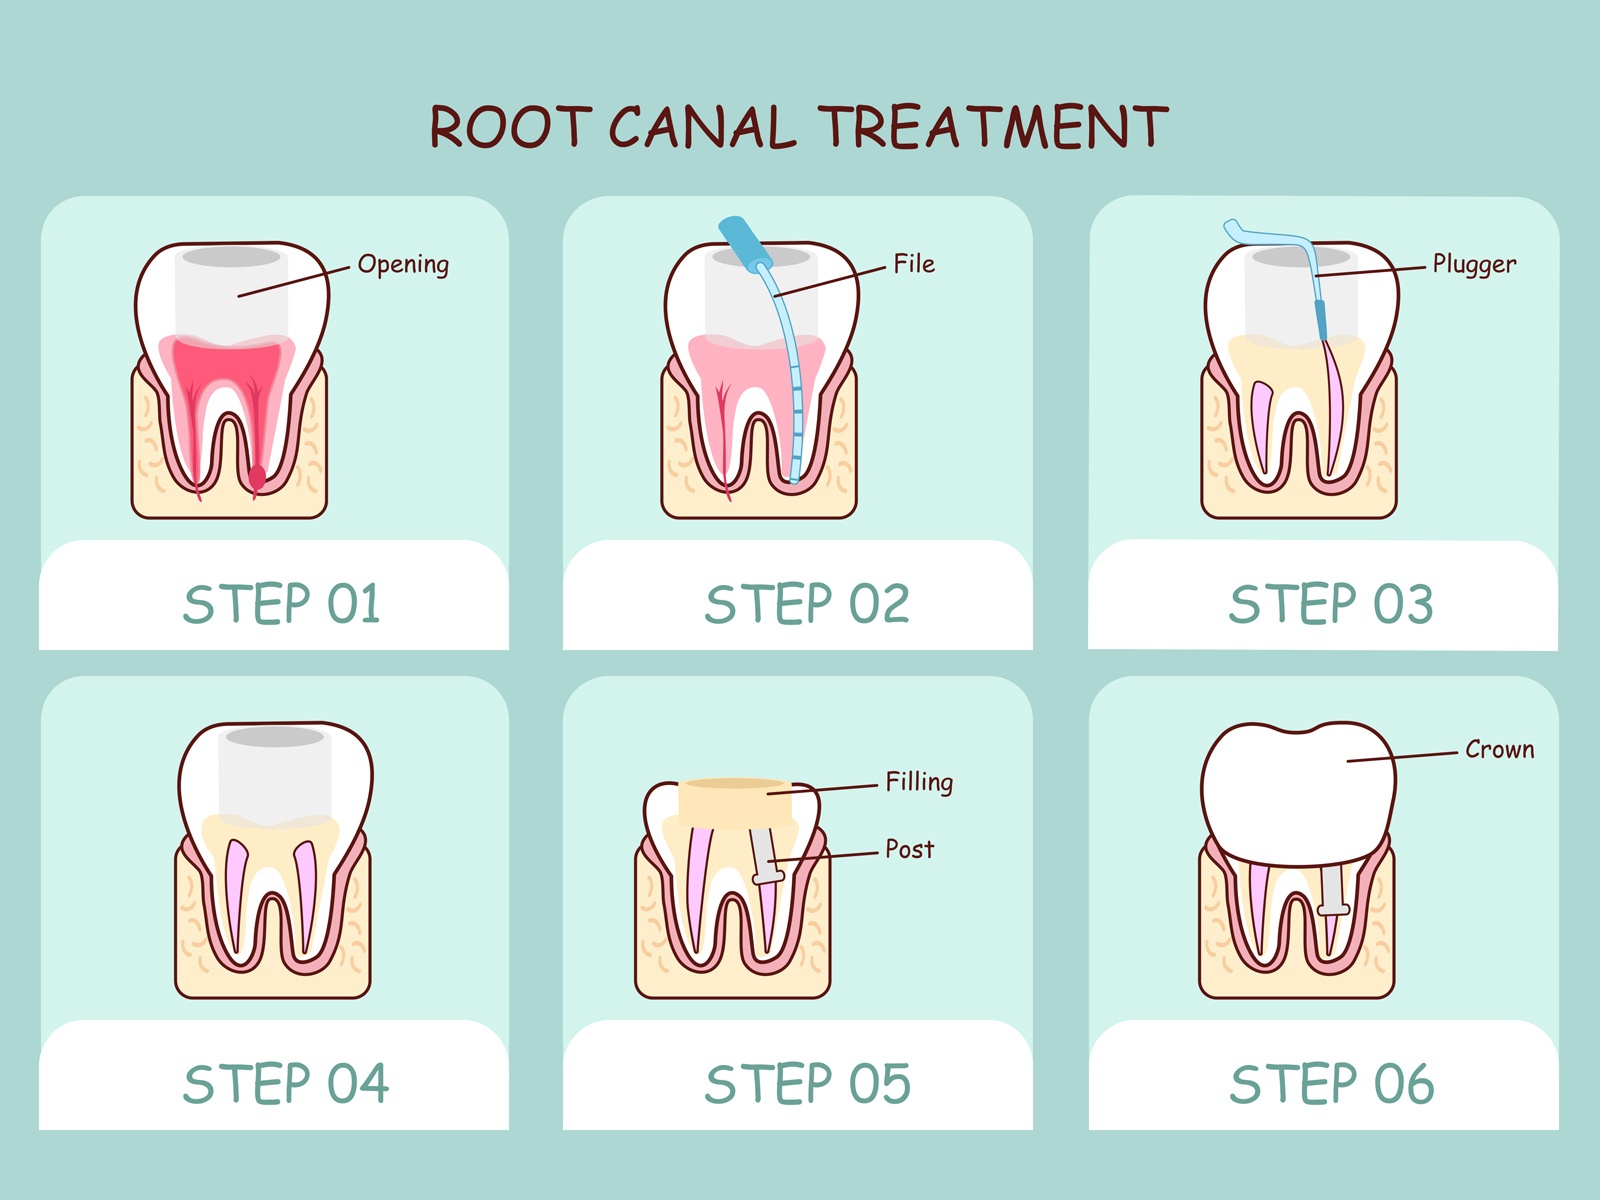 How many appointments does a root canal take?